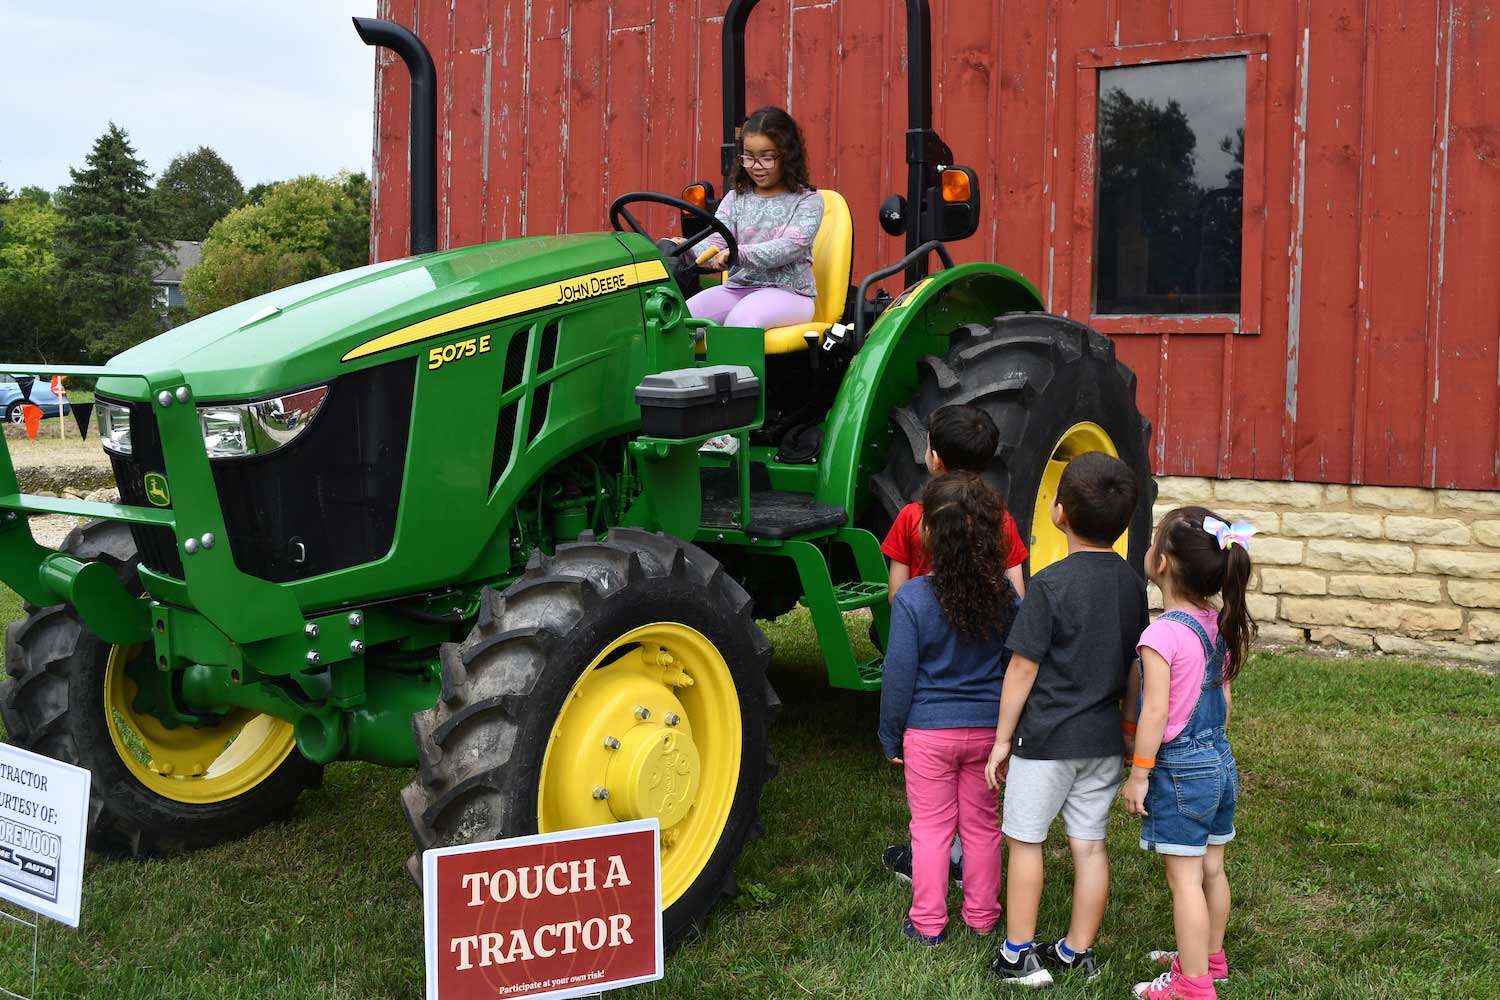 A child sitting on a green John Deere tractor while a line of kids waits for their turns.